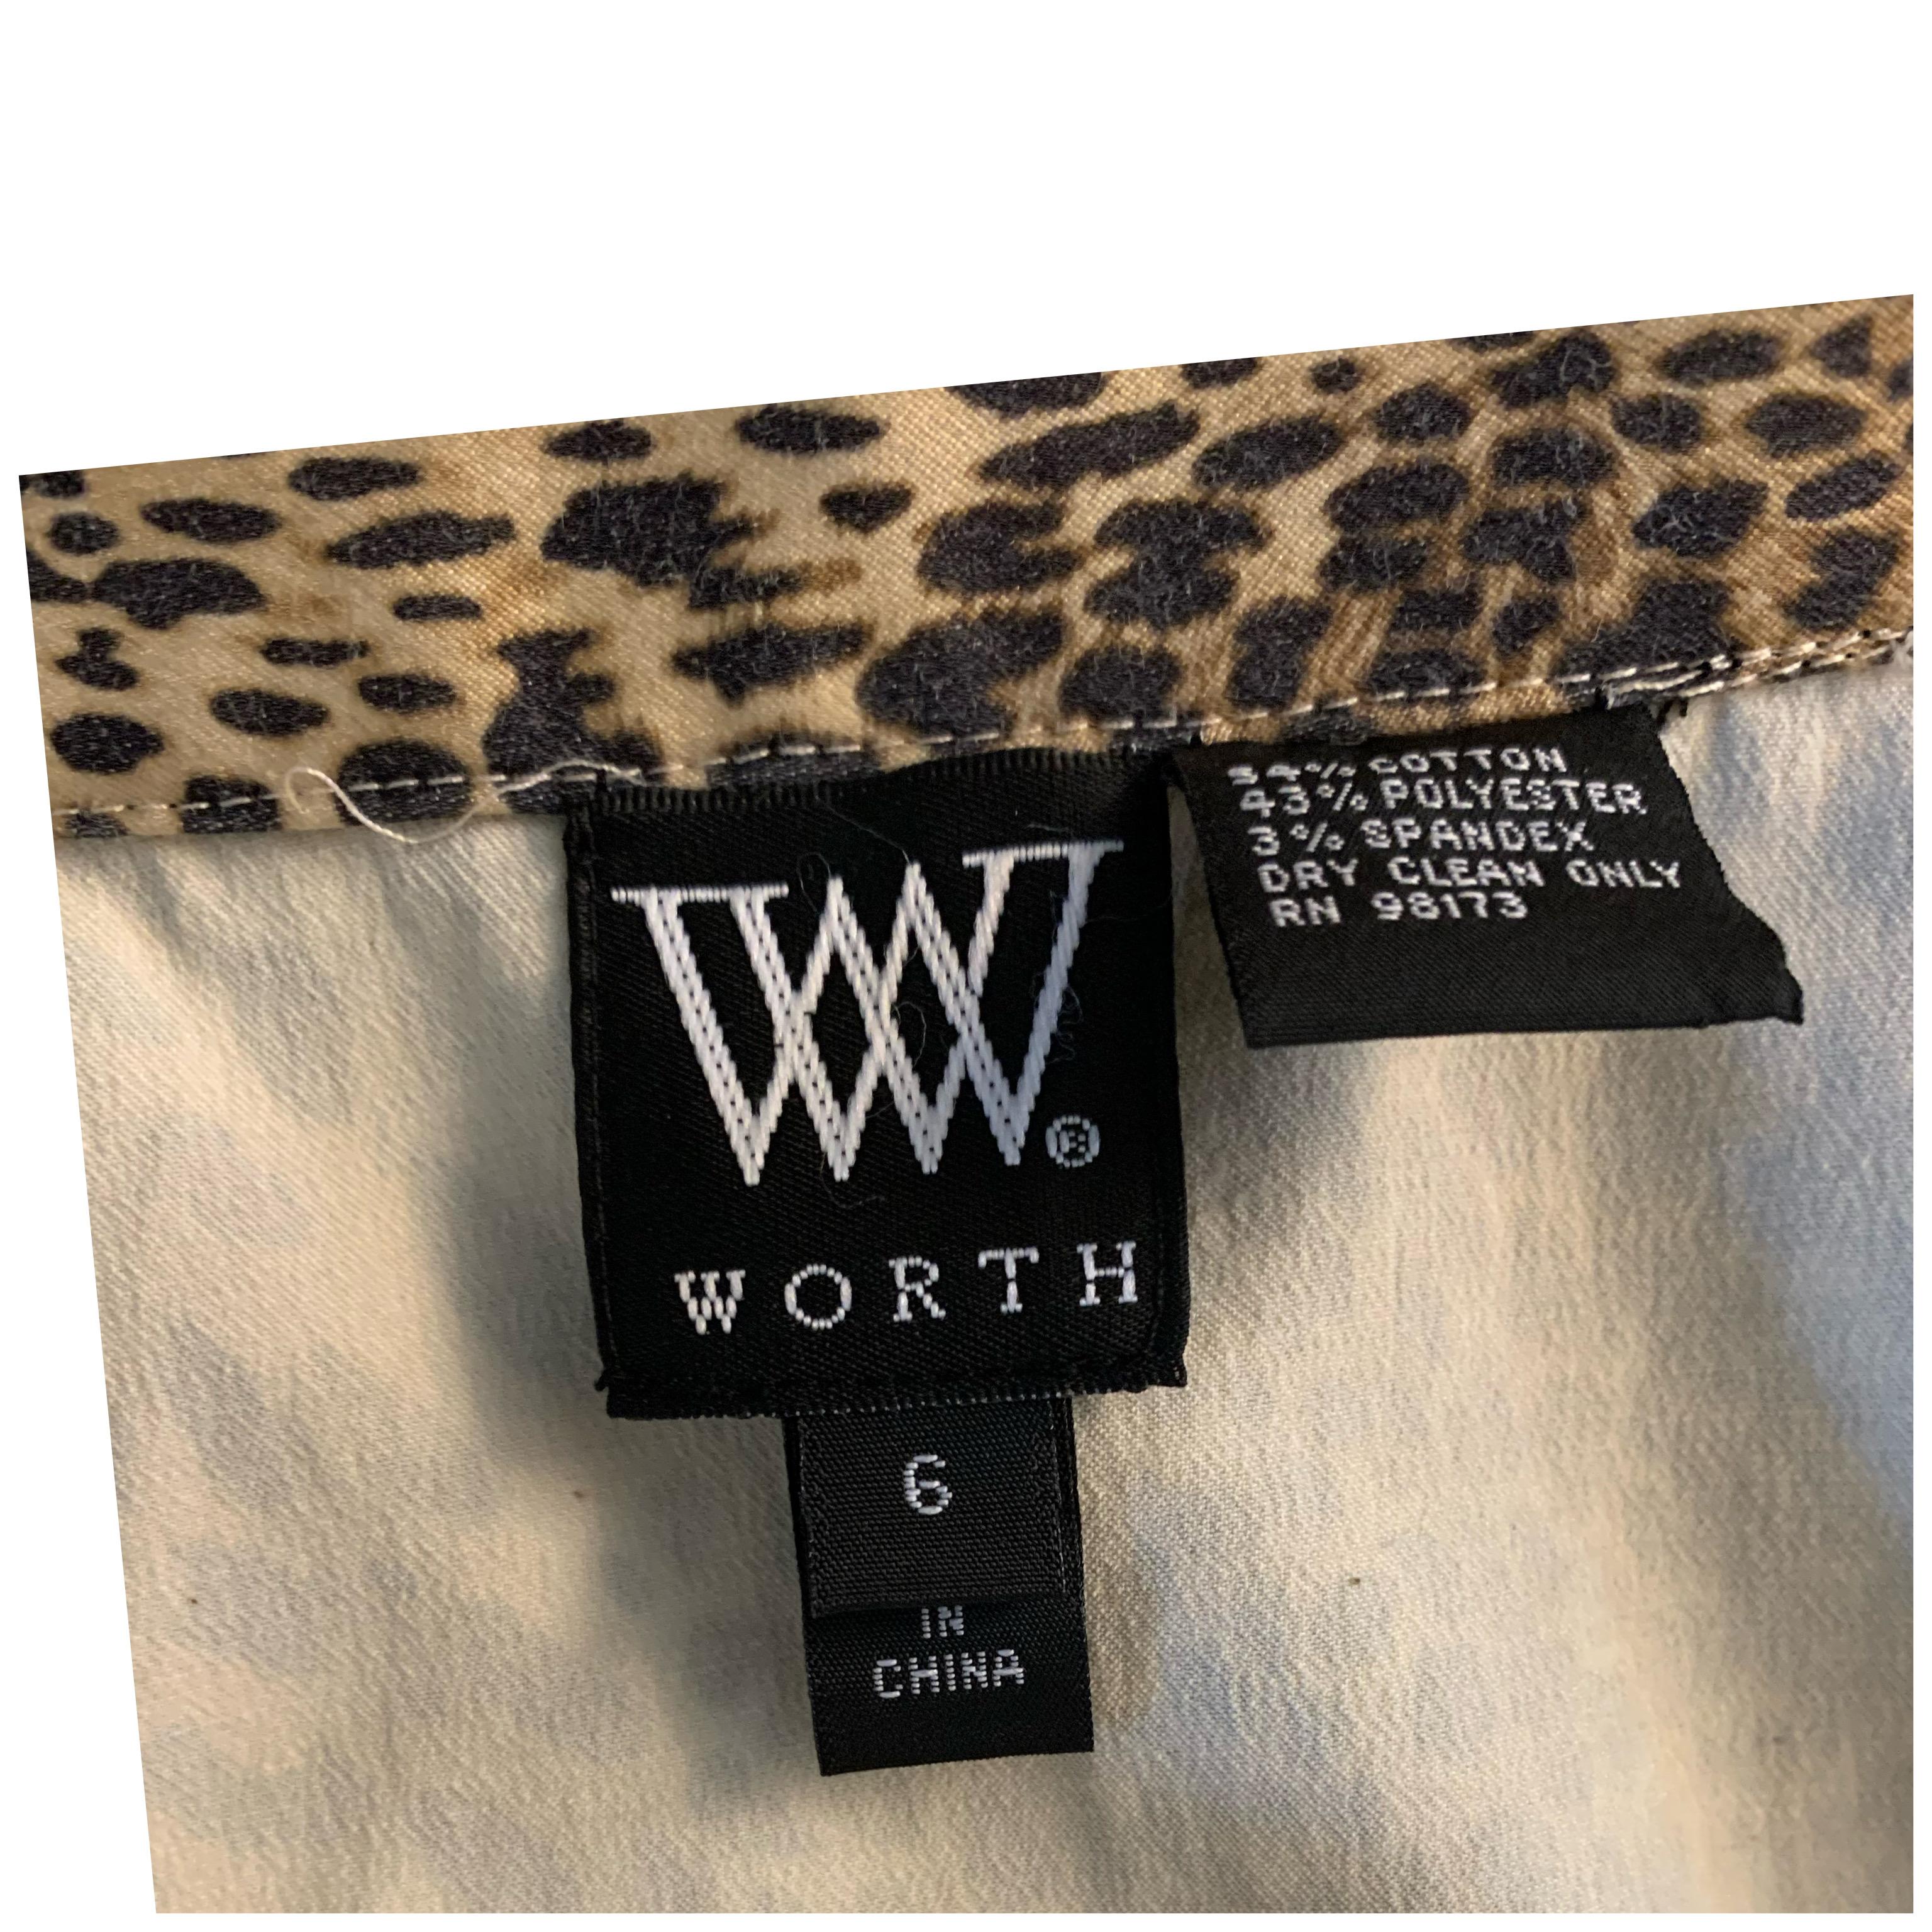 Worth “W” Label Leopard Print Skirt with Pleated Net Ruffle Hem Size 6 In Excellent Condition For Sale In Palm Springs, CA